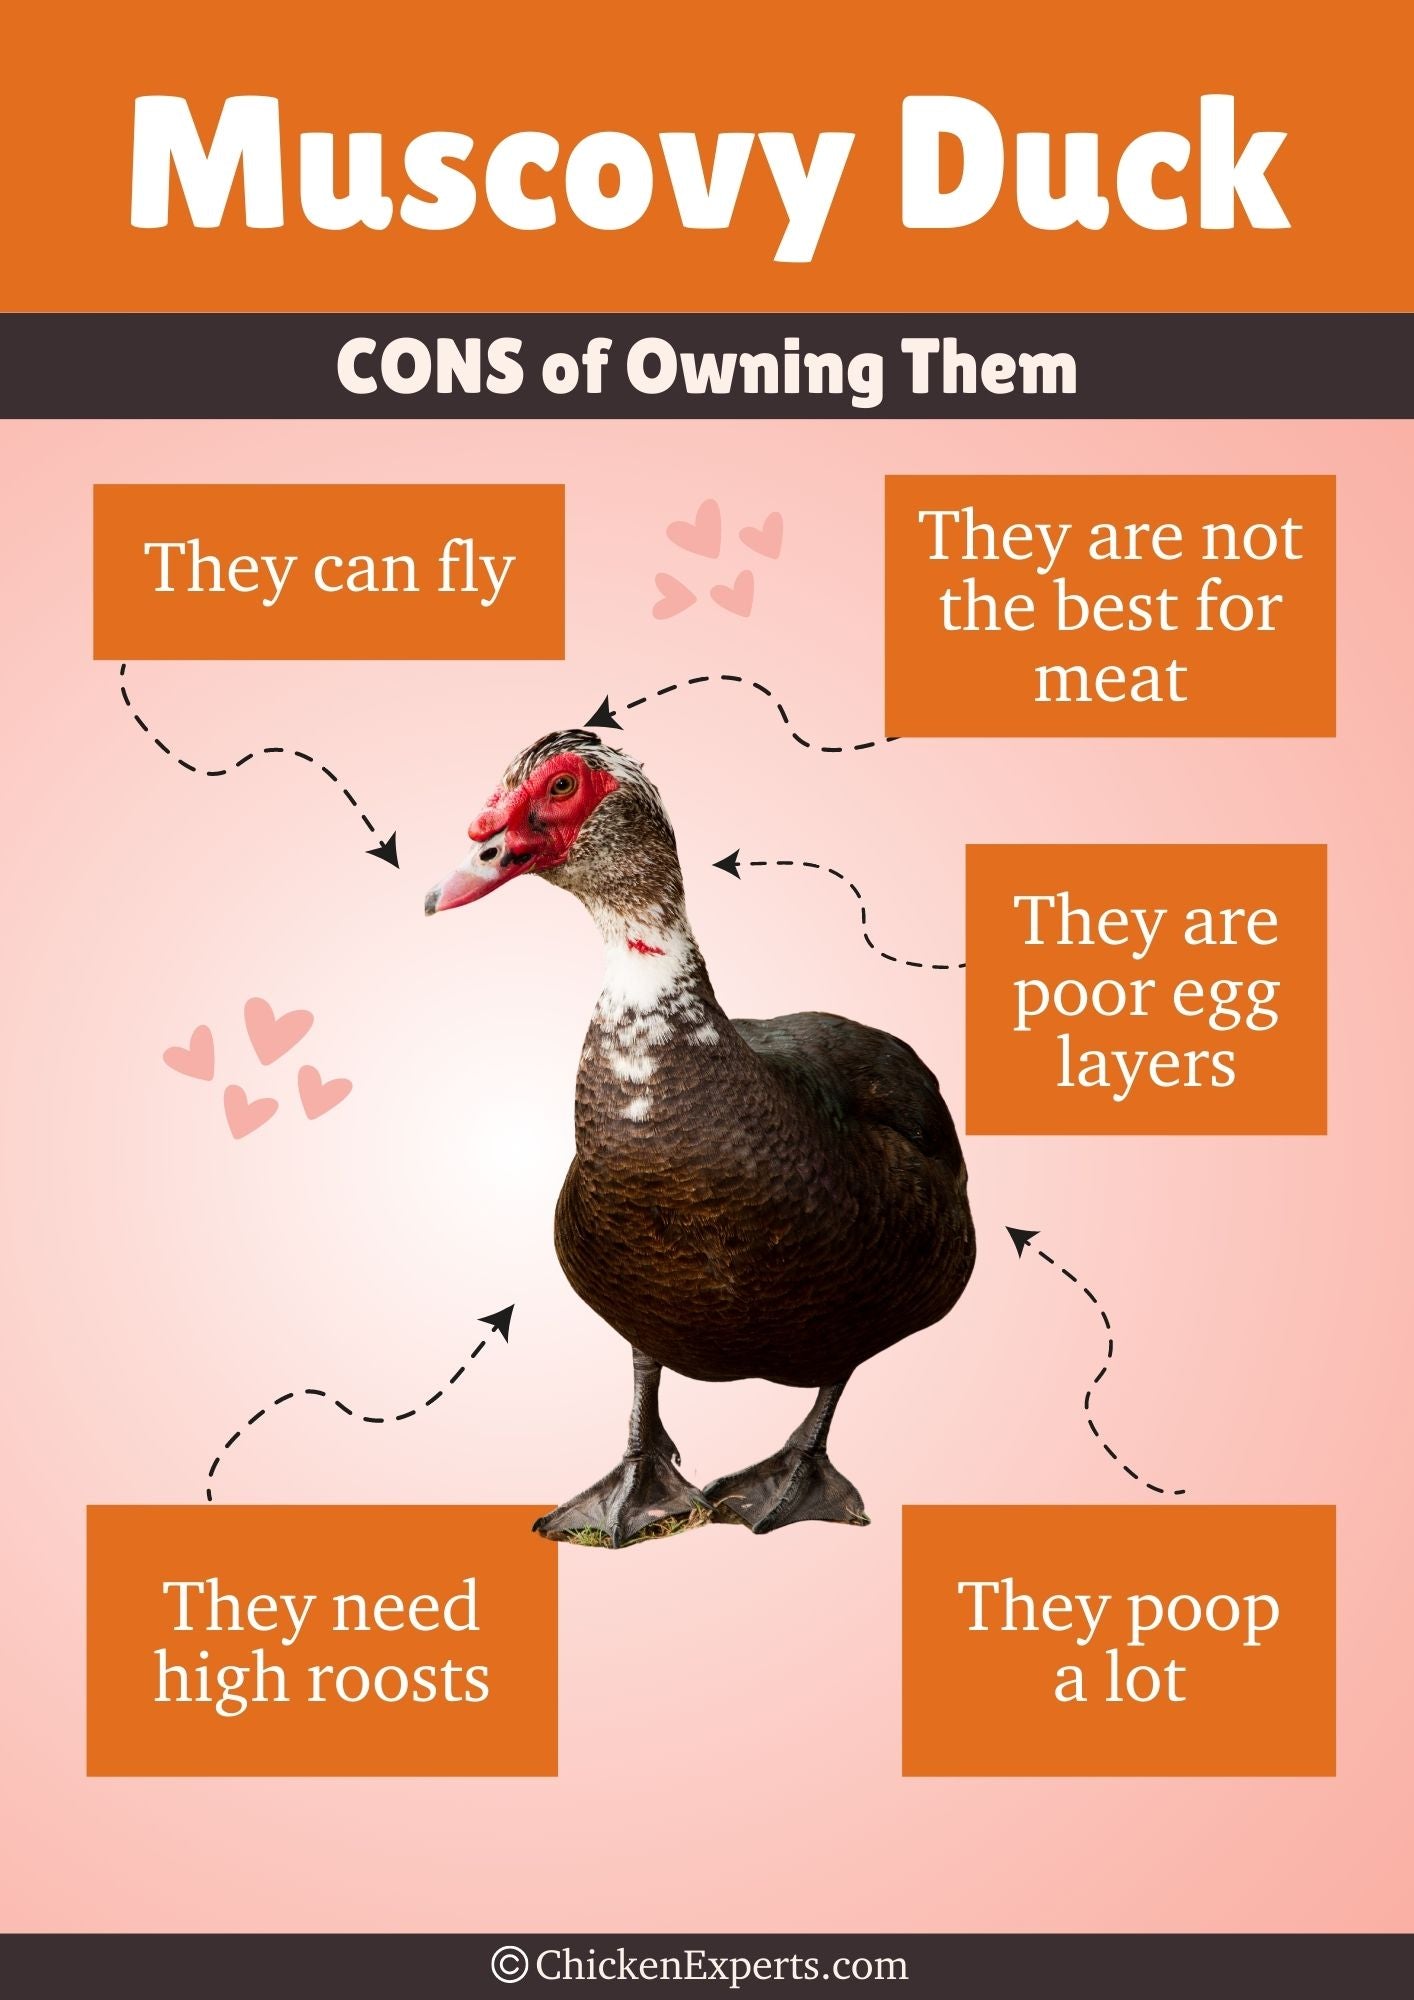 cons of owning muscovy ducks